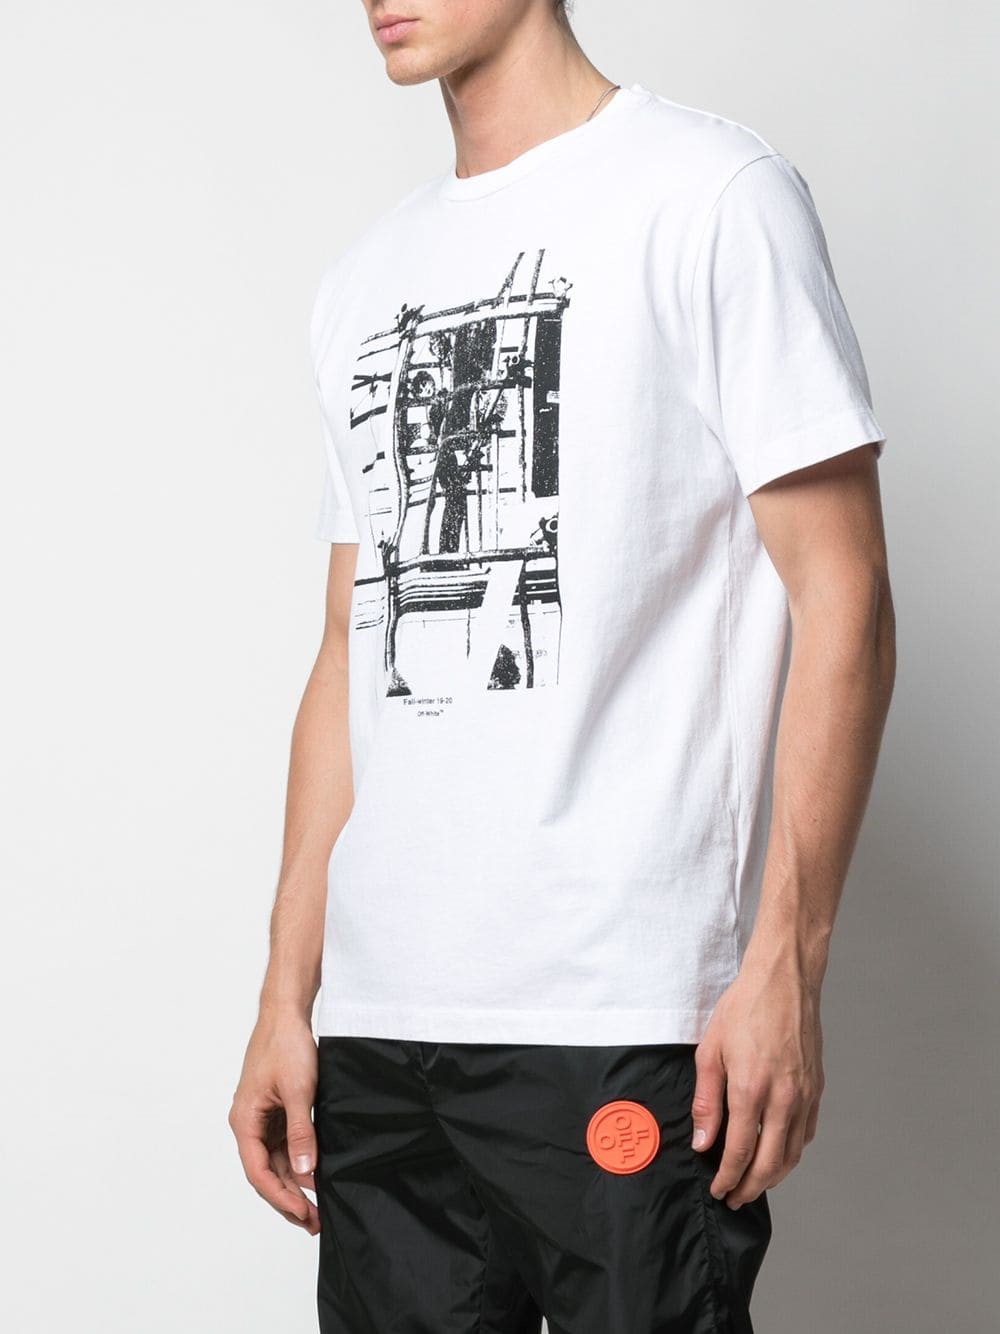 off-white SCAFFOLDING T-SHIRT available on montiboutique.com - 30641